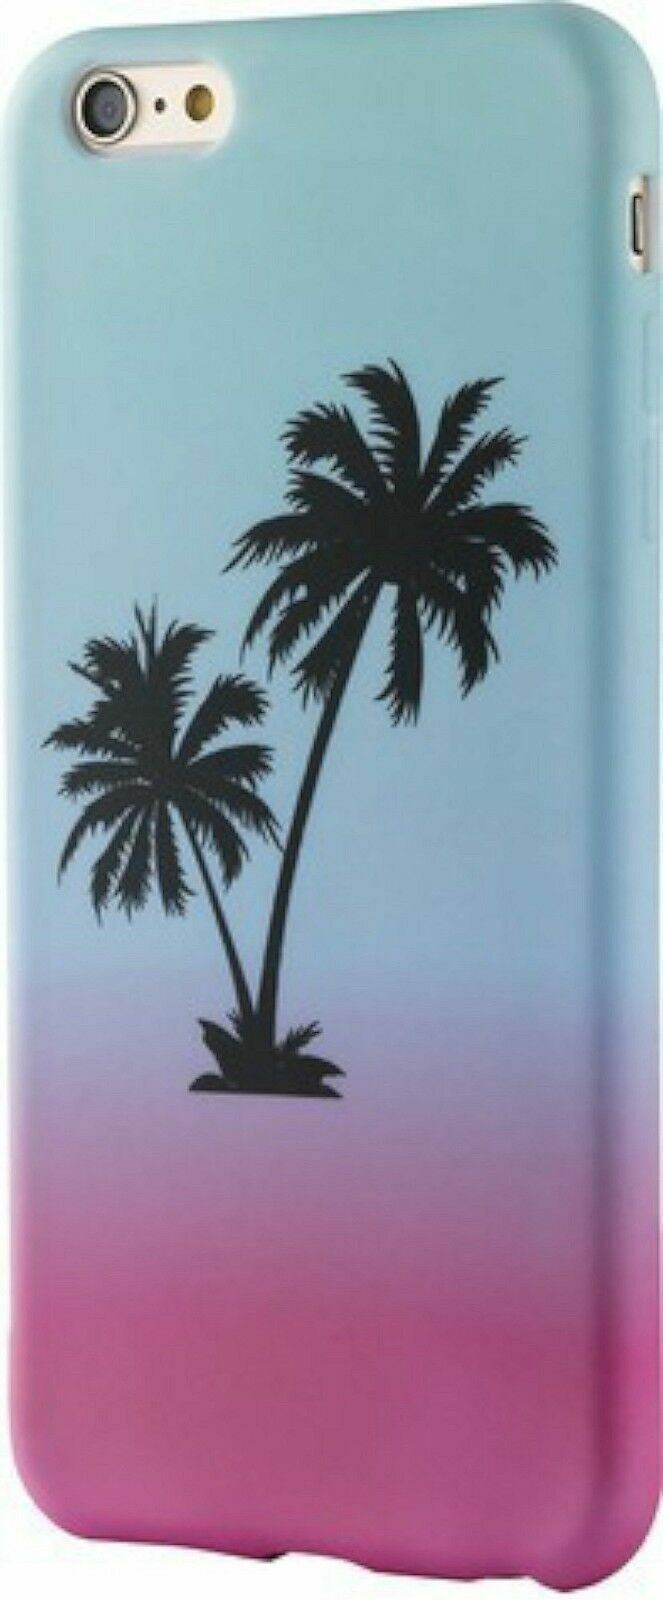 NEW Dynex iPhone 6/6s Palm Trees BLUE/PINK Cell Phone Case Soft Shell DX-MA6S8PT - $5.59